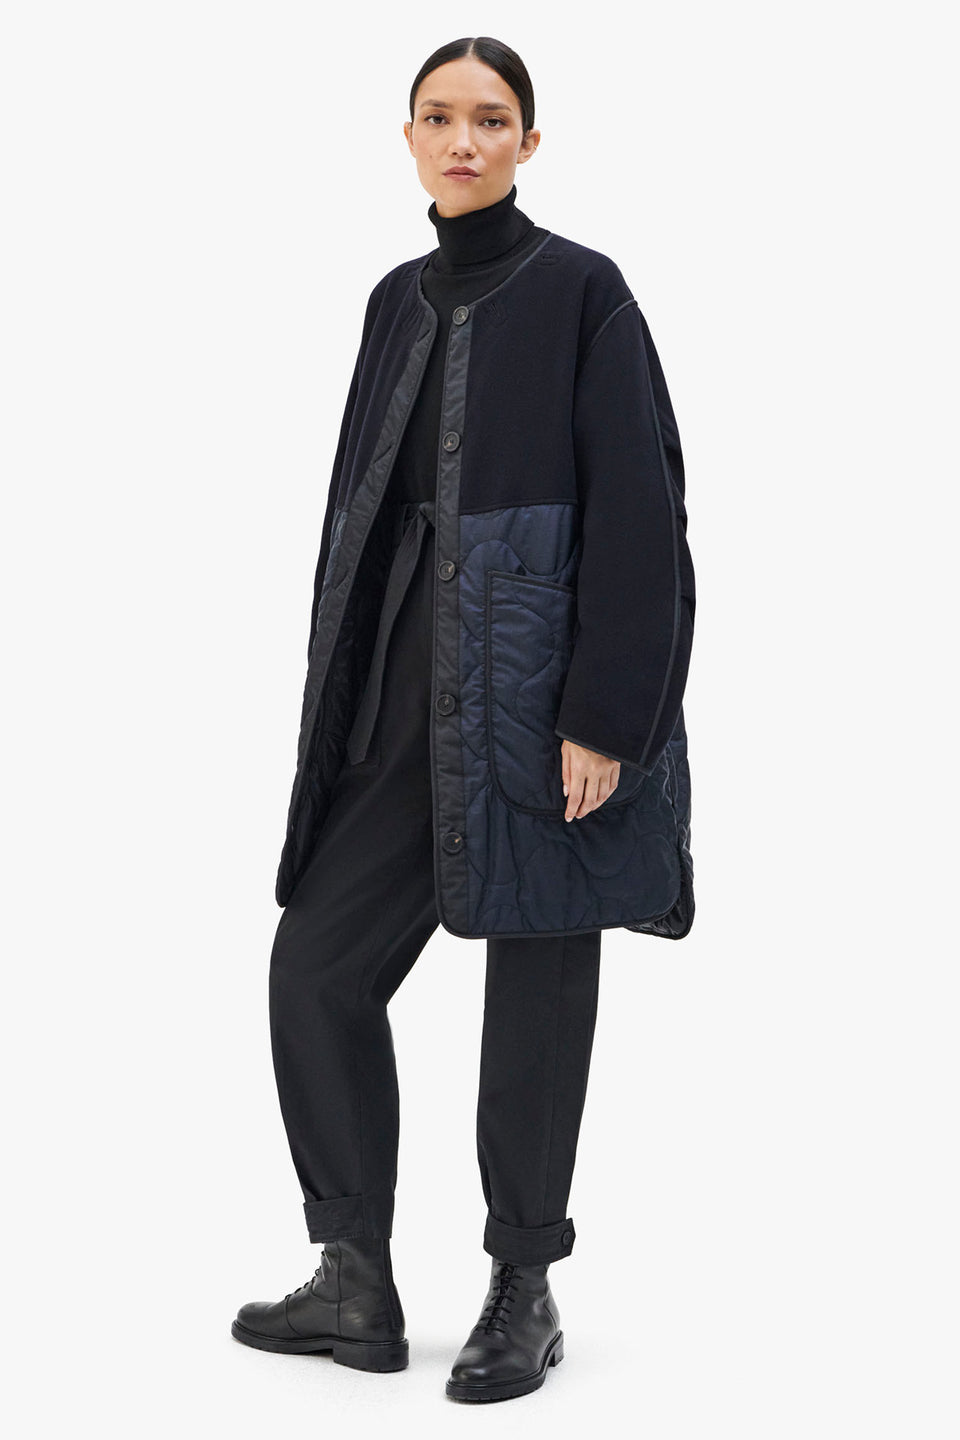 Wool Quilt Jacket - Navy / Black (listing page thumbnail)